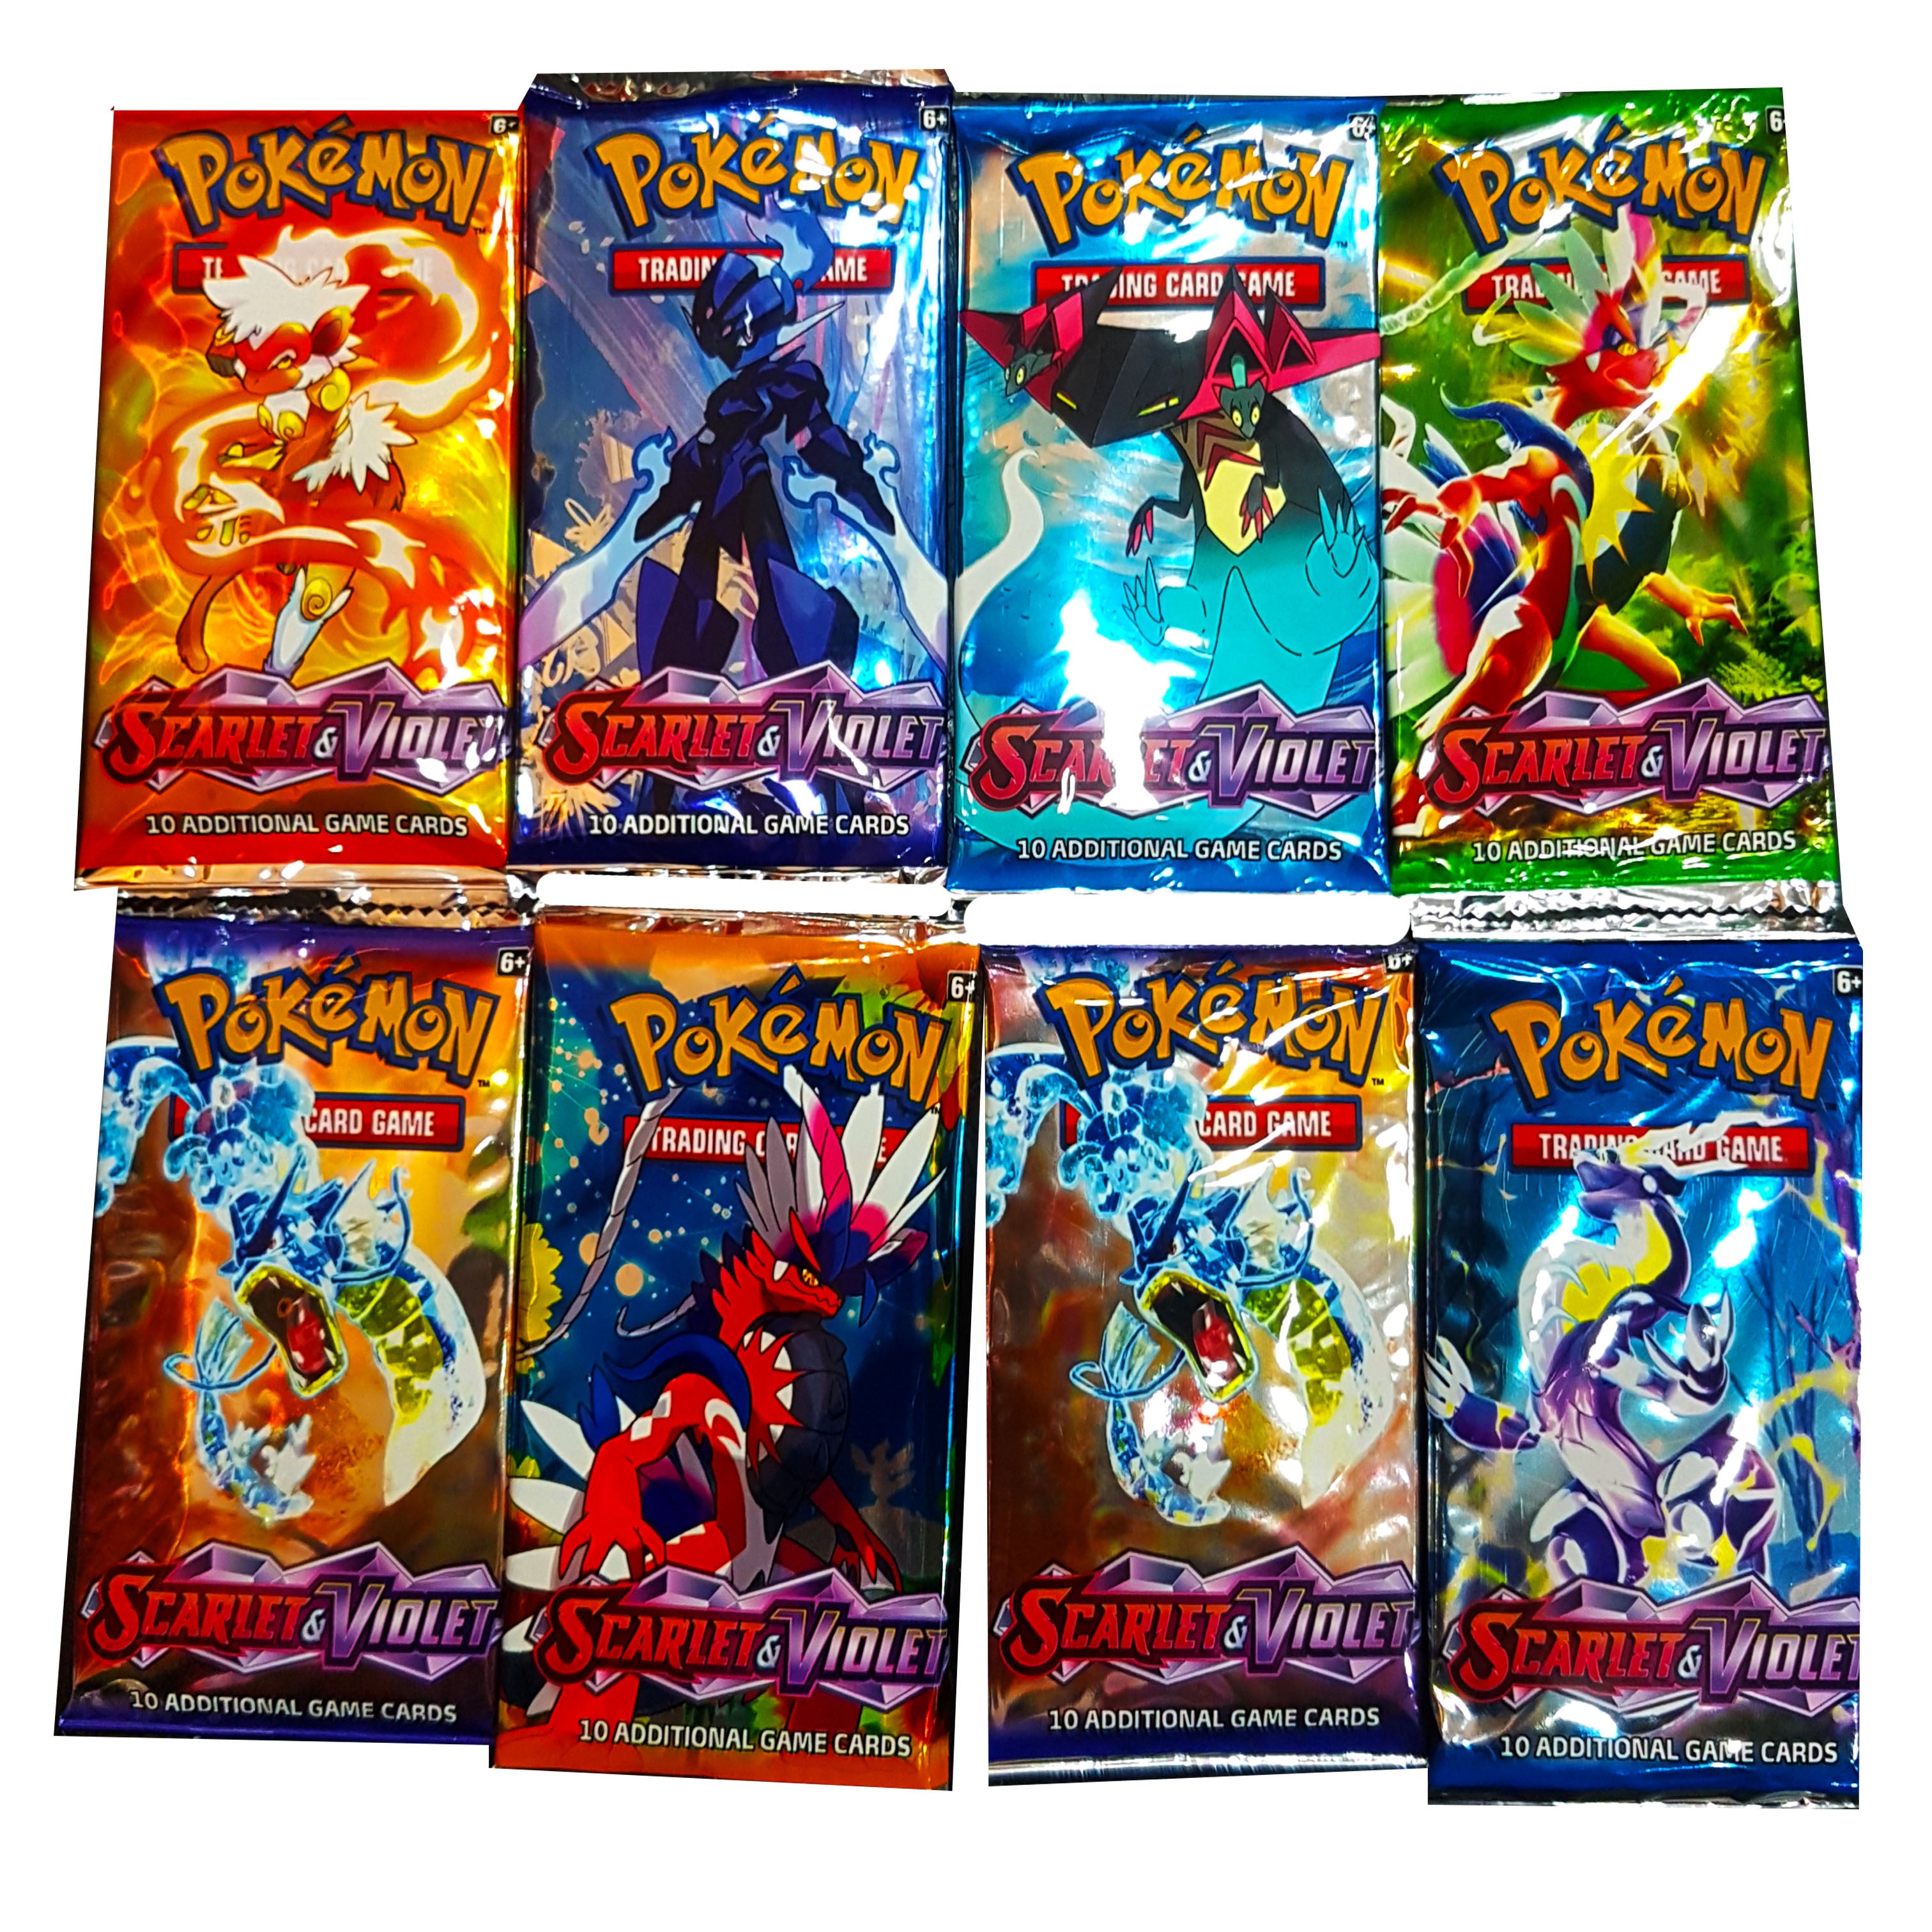 New Arrival: 8-Pack Pokemon Card Game Set - Perfect Gift for Boys & Kids - Exciting Pokemon Trading Card Game Adventure